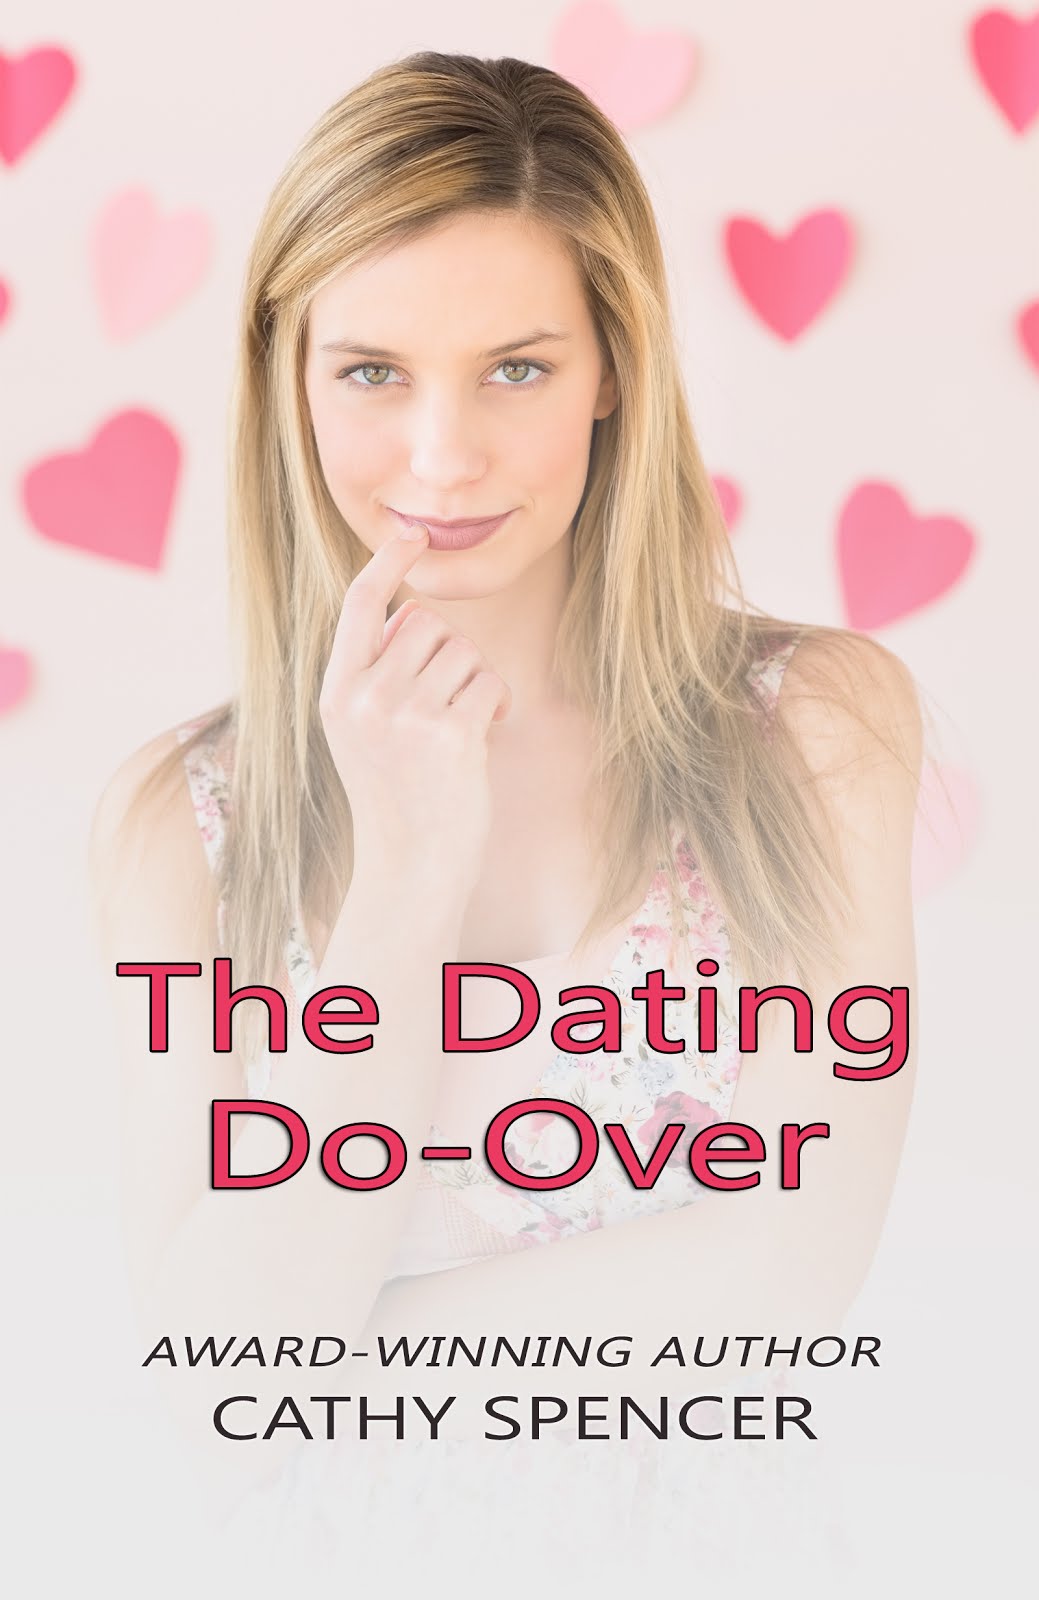 The Dating Do-Over